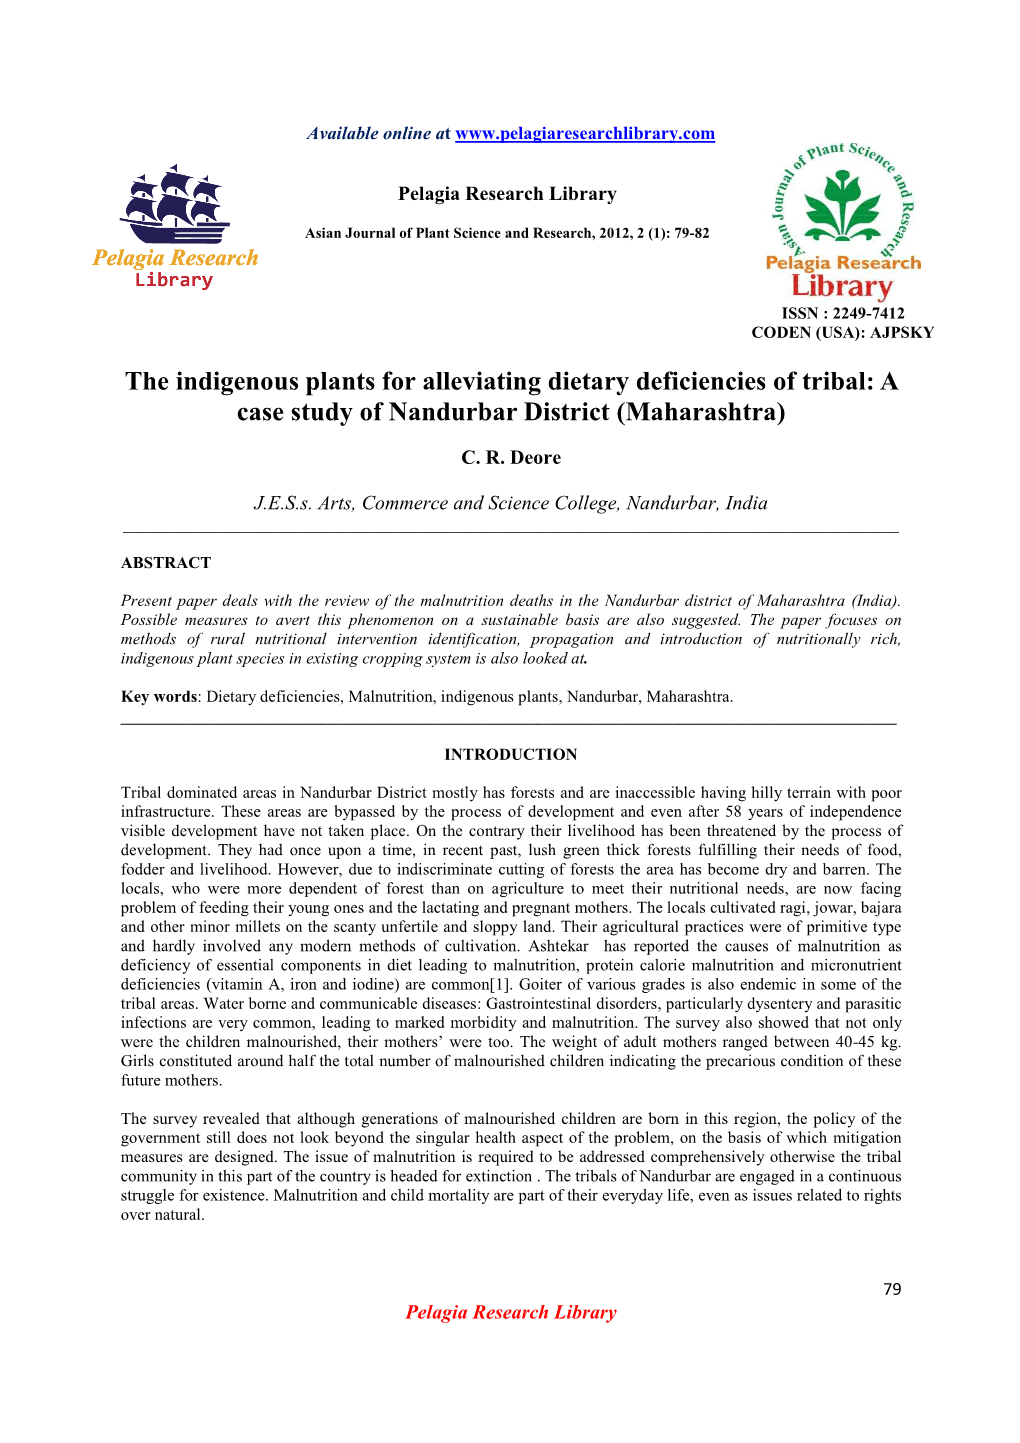 The Indigenous Plants for Alleviating Dietary Deficiencies of Tribal: a Case Study of Nandurbar District (Maharashtra)